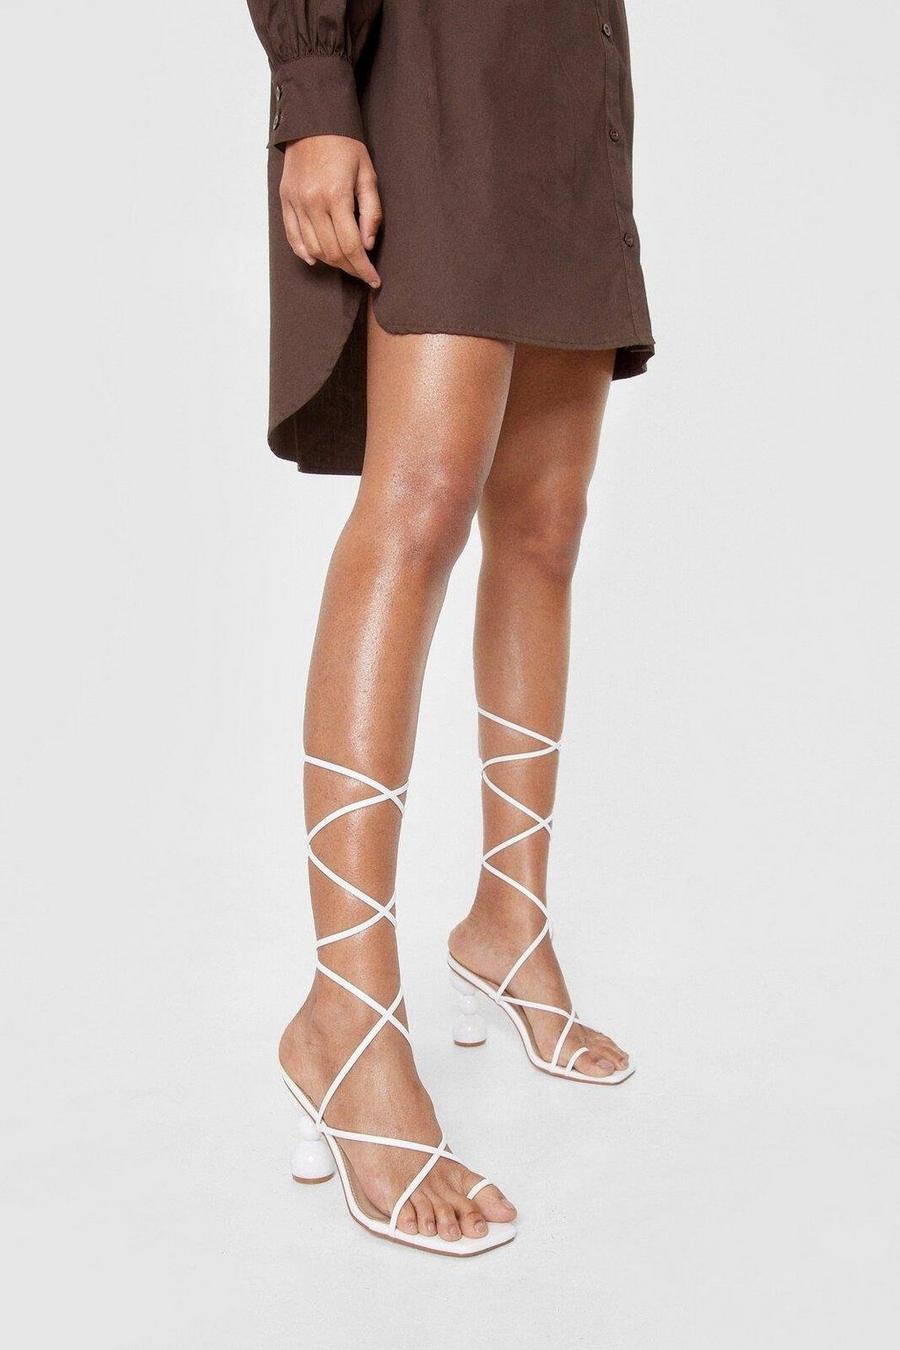 White Faux Leather Strappy Heeled Ball Sandals